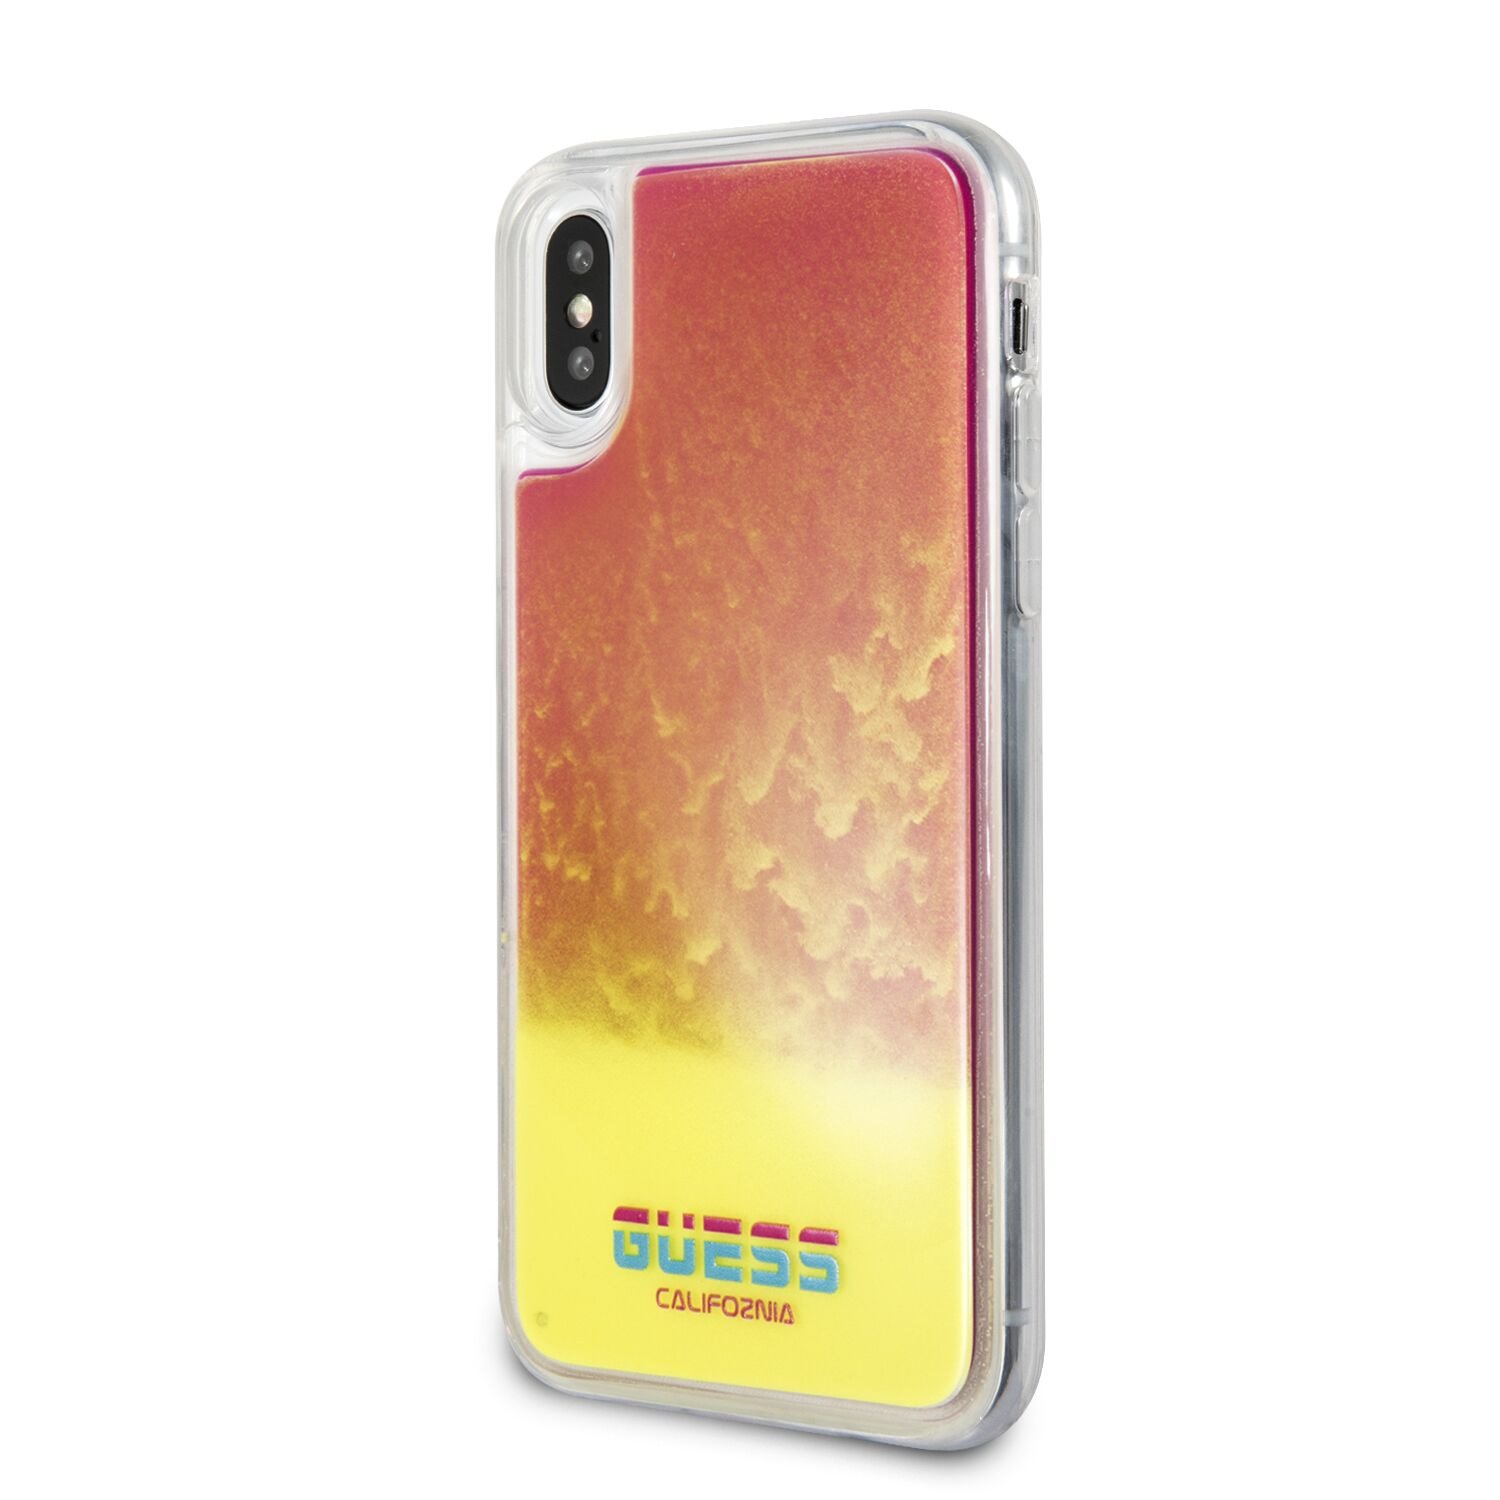 Guess Glow in The Dark GUHCPXGLCPI Zadní kryt pro Apple iPhone X/XS sand/pink  in The Dark PC/TPU Kryt pro iPhone X/XS Sand/Pink (EU Blister)